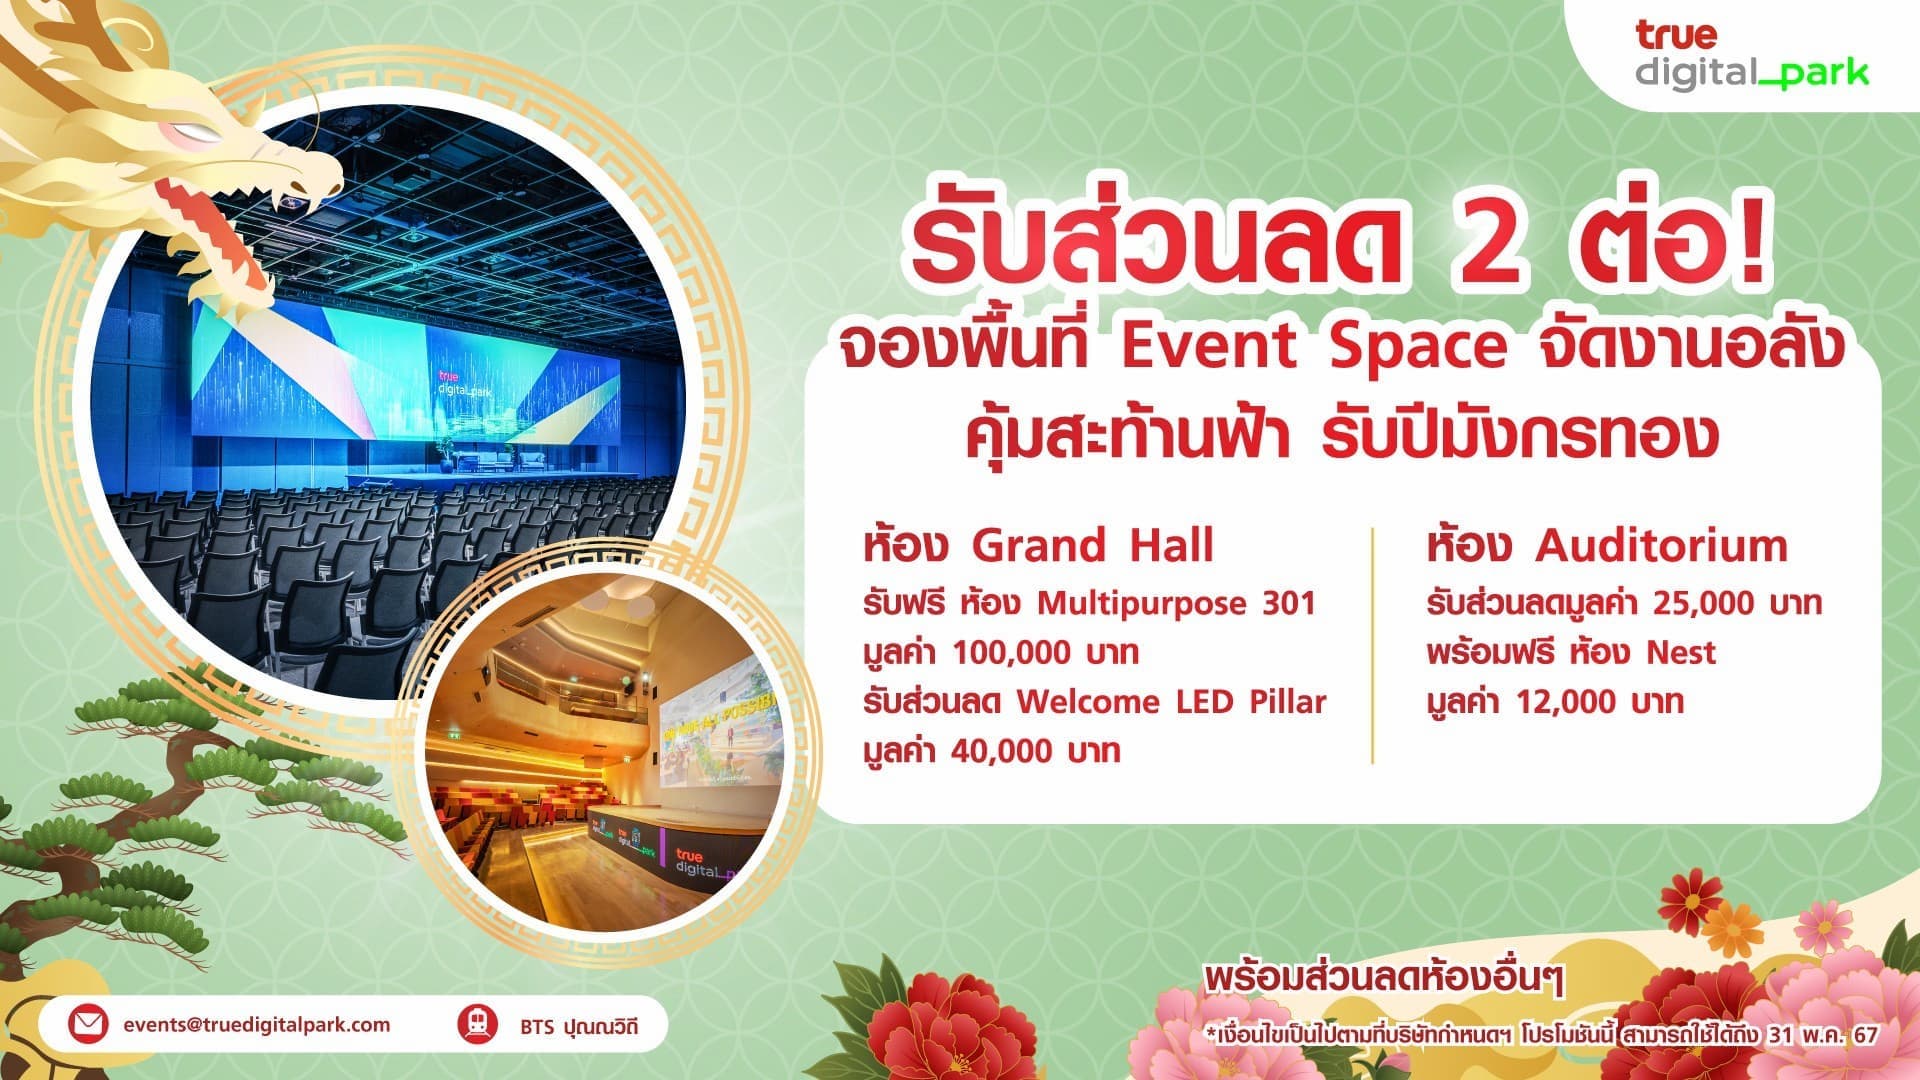 Special Promotion Alert! Discover state-of-the-art event spaces at True Digital Park